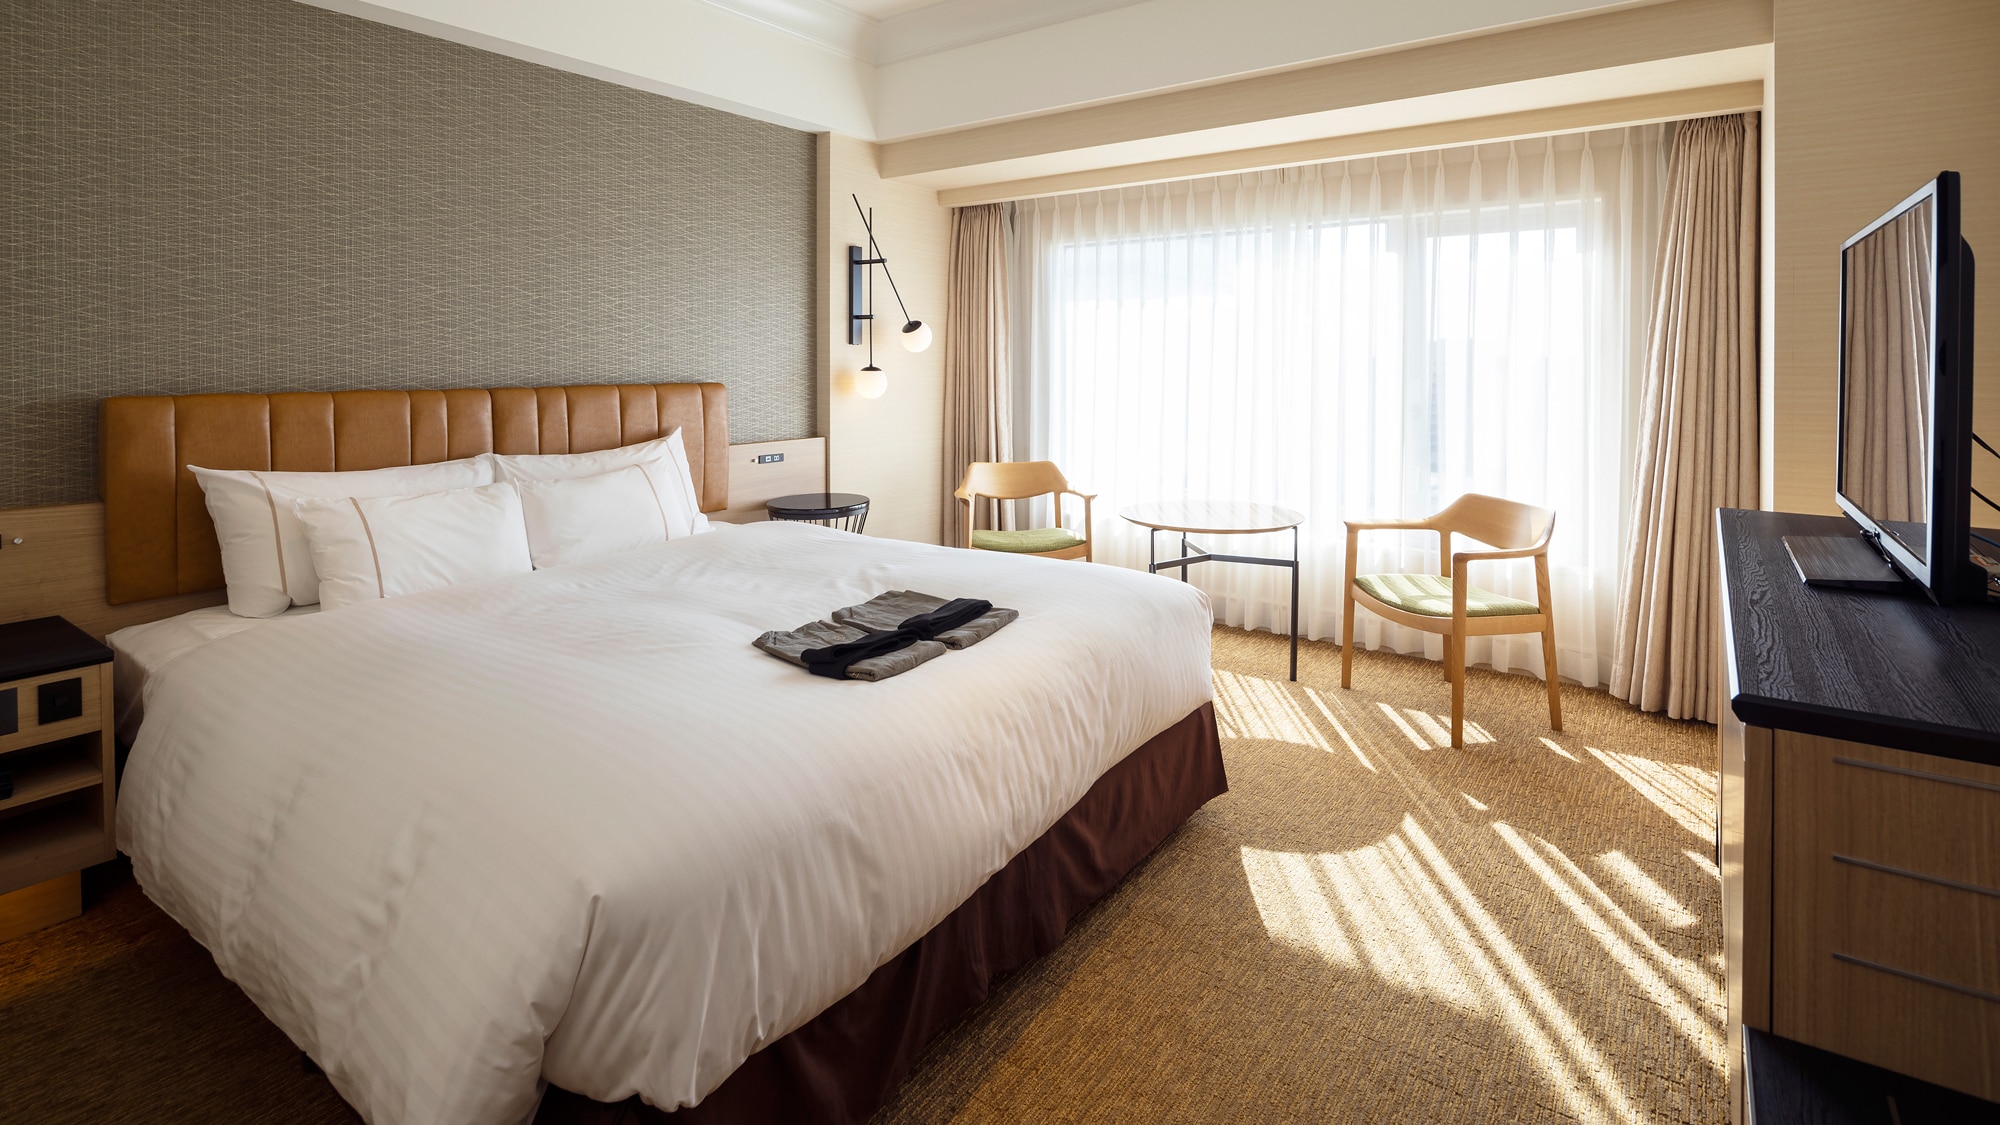 [Preferred Double] 28 square meters, sea side, bed width 180 cm. "Sheraton Signature Bed".